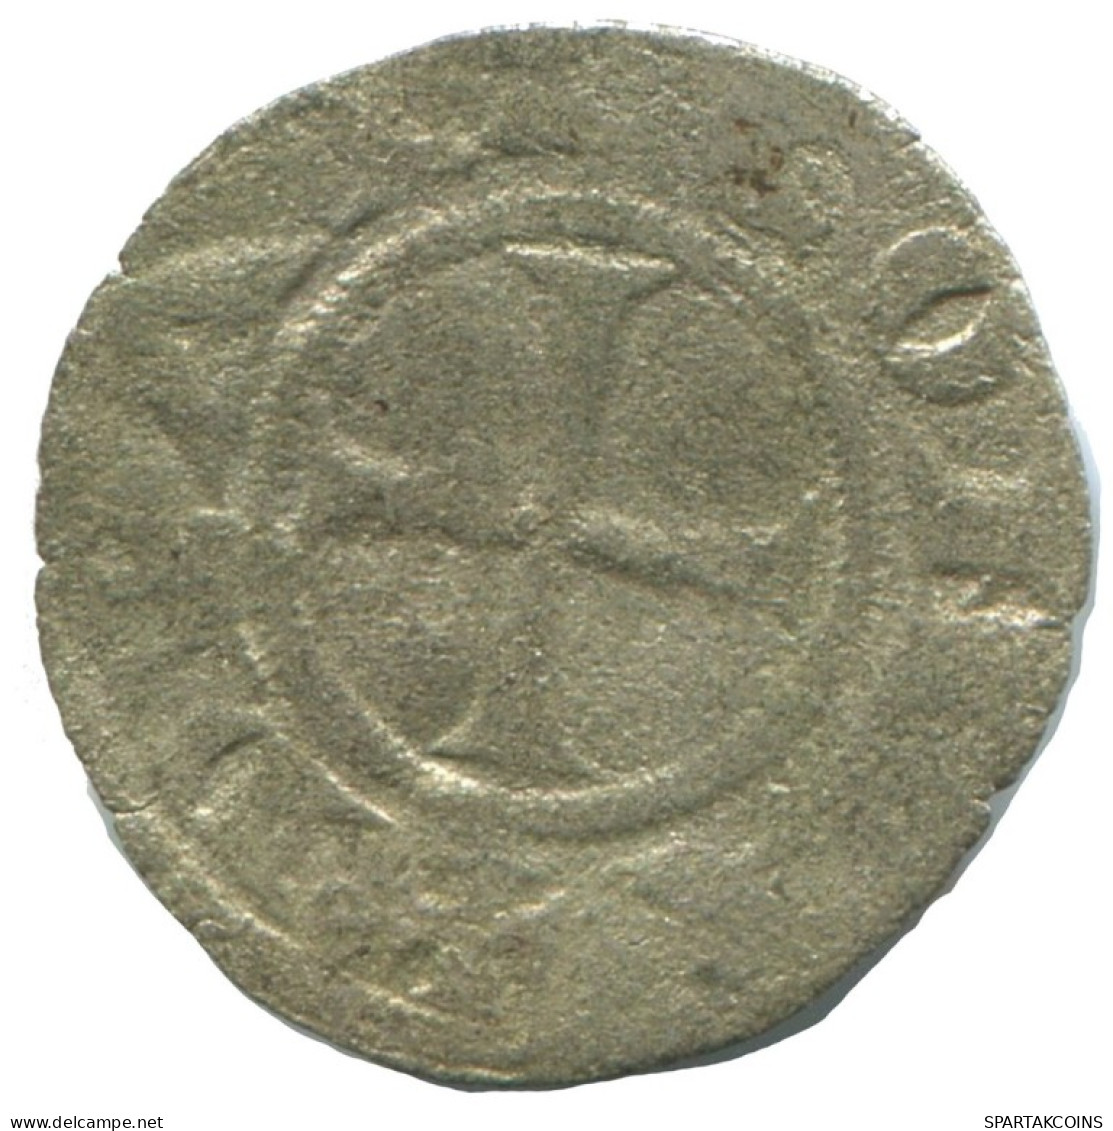 CRUSADER CROSS Authentic Original MEDIEVAL EUROPEAN Coin 0.5g/15mm #AC108.8.D.A - Other - Europe